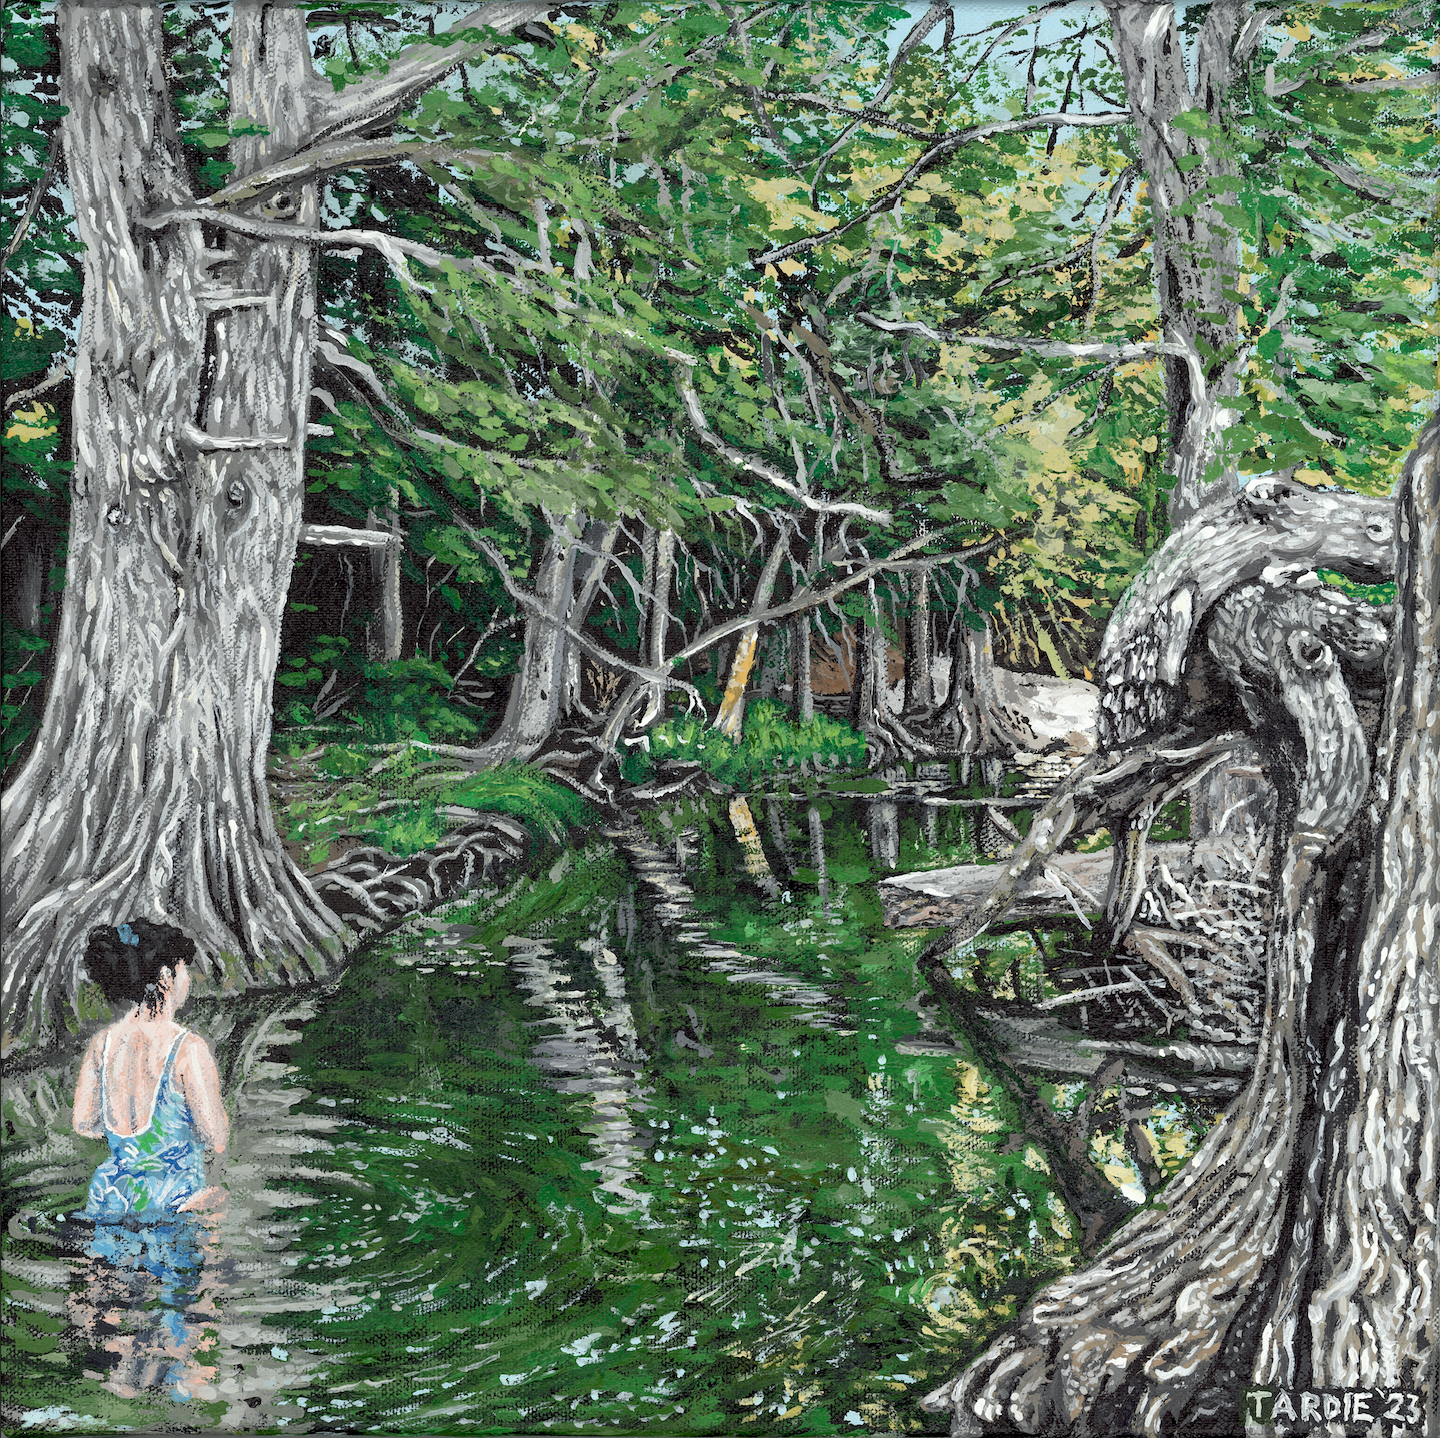 Texas Water Nymph and Bald Cypress